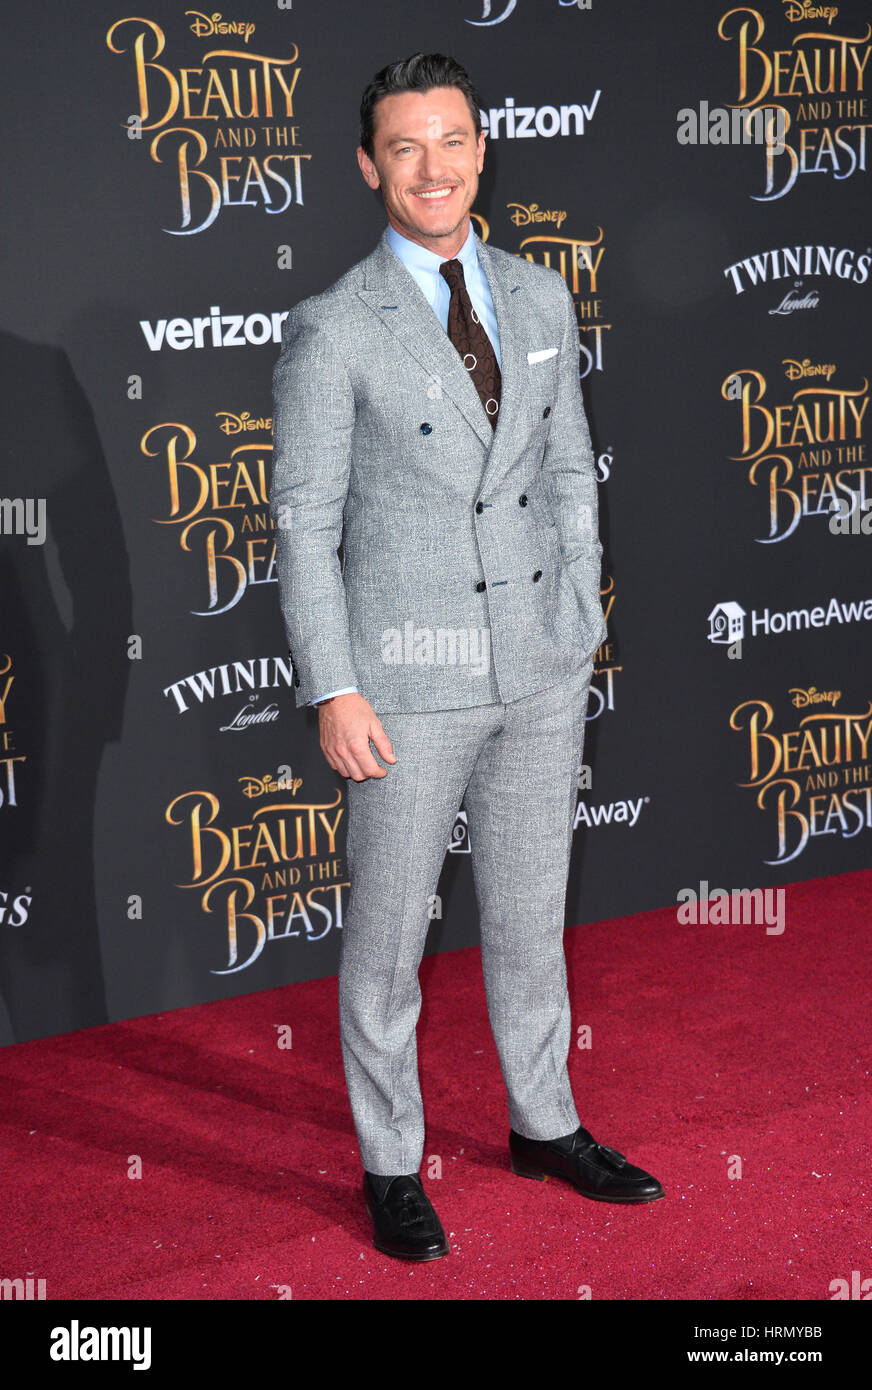 Los Angeles, USA. 02nd Mar, 2017. Actor Luke Evans at the premiere for Disney's 'Beauty and the Beast' at the El Capitan Theatre, Hollywood. Picture Credit: Sarah Stewart/Alamy Live News Stock Photo